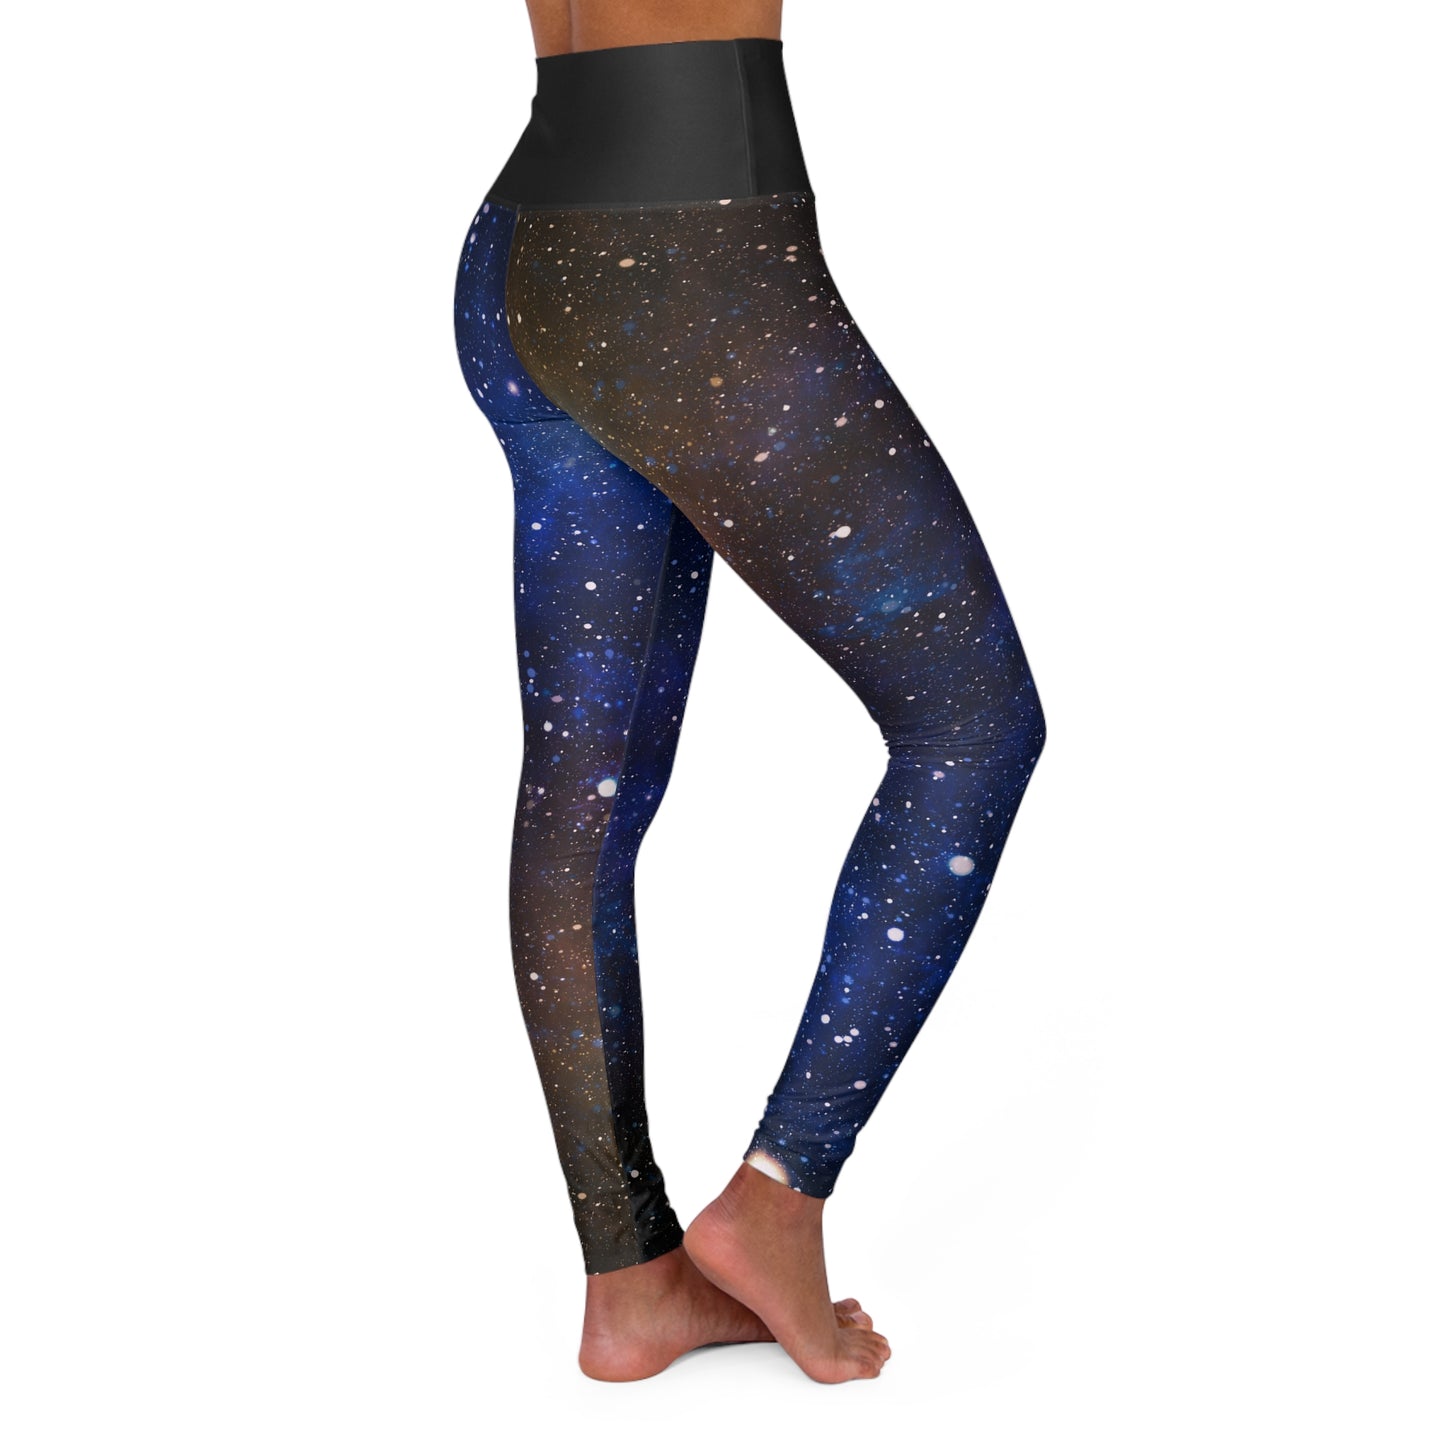 Dark Starry Cosmos Nebula Abstract Skinny Fit High Waisted Yoga Leggings, Expertly Crafted in the USA